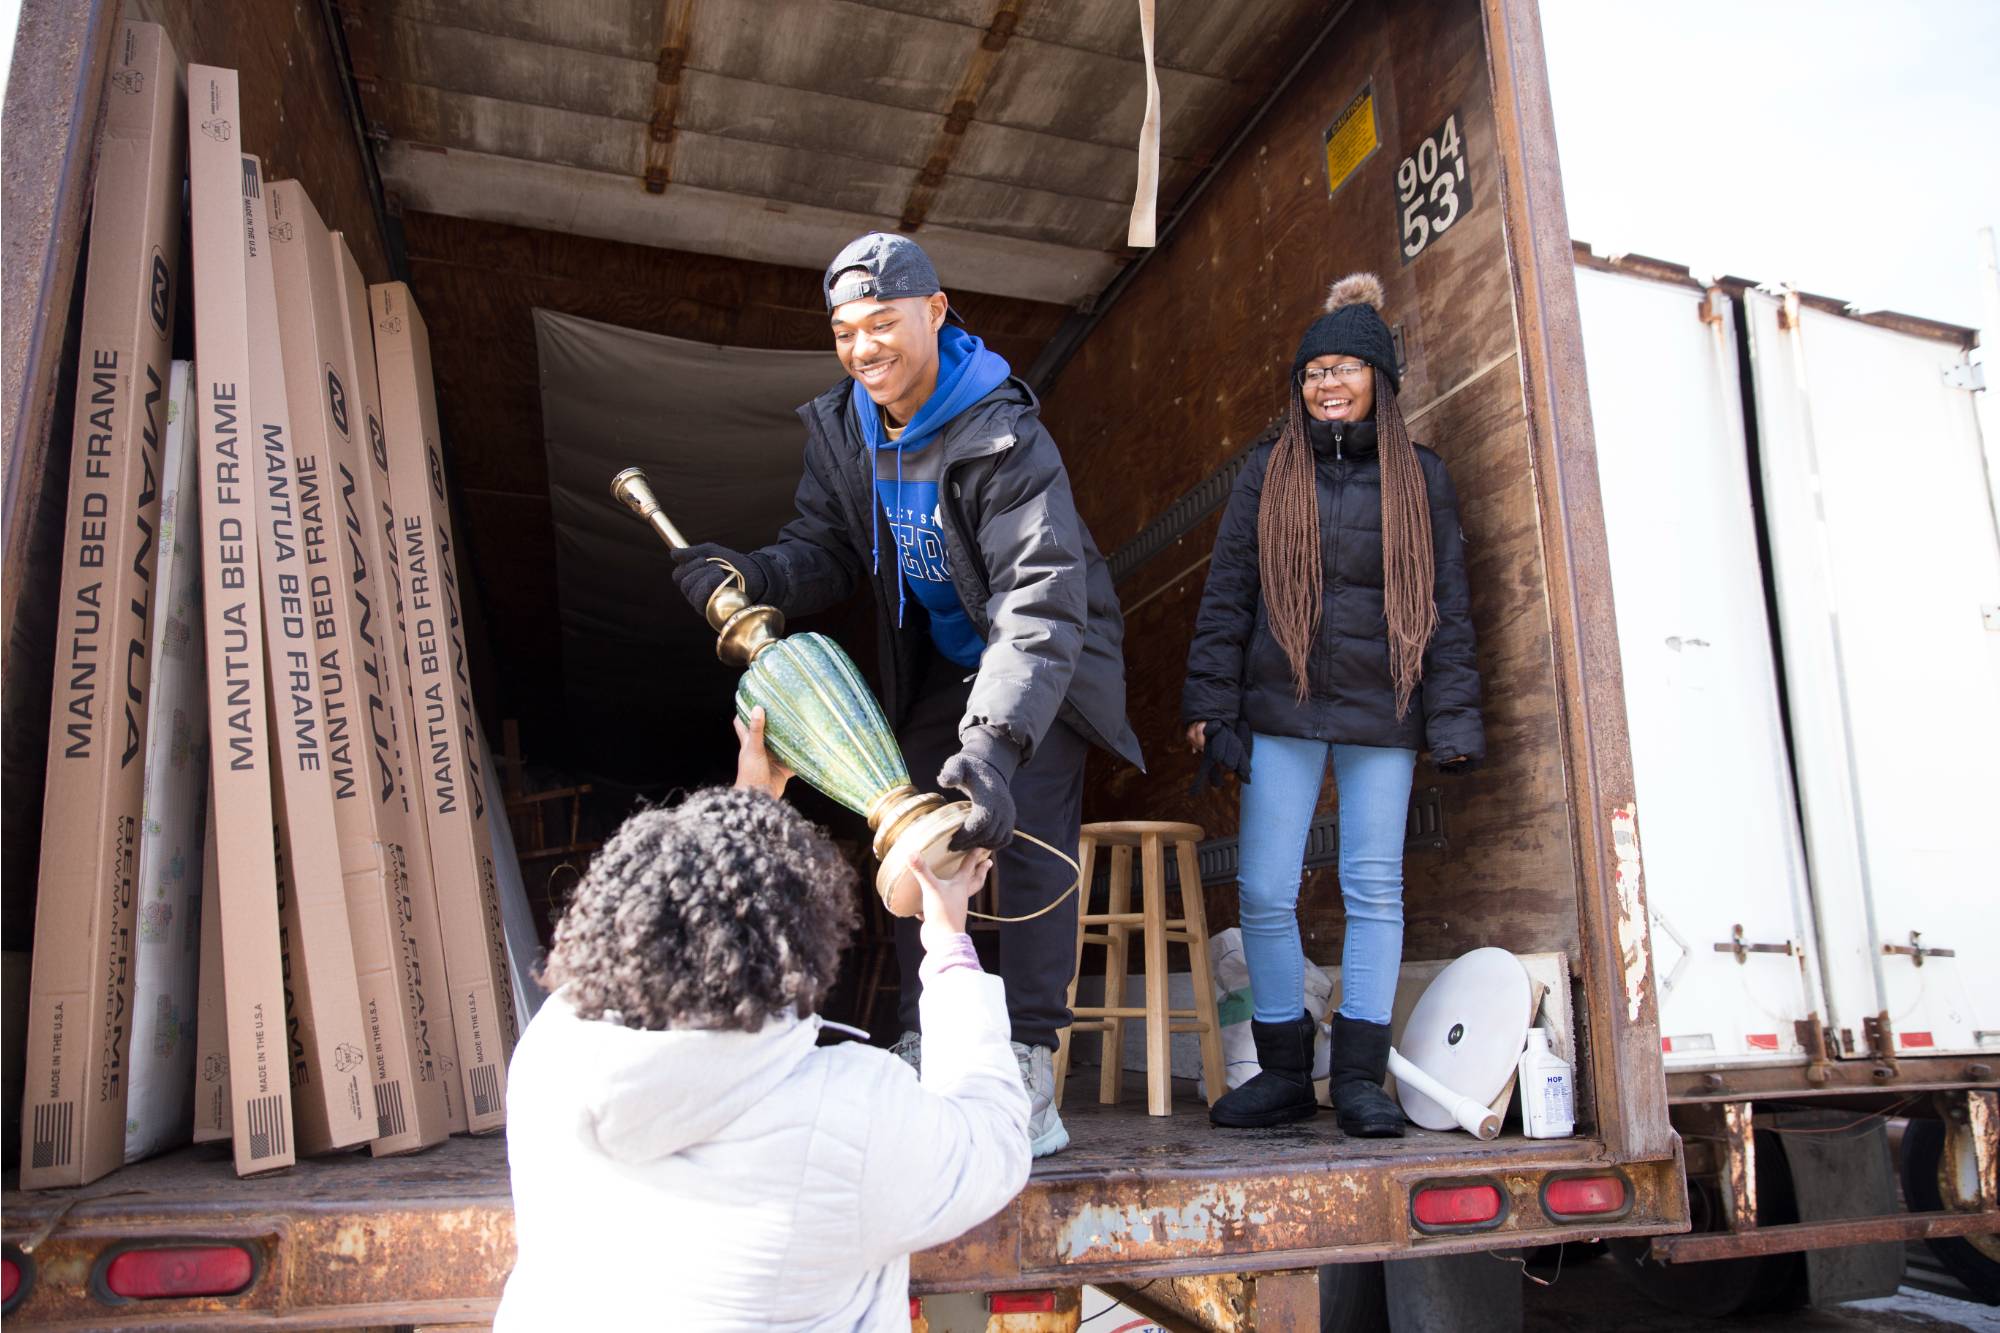 A student stands in a moving truck and passes a lamp to a woman